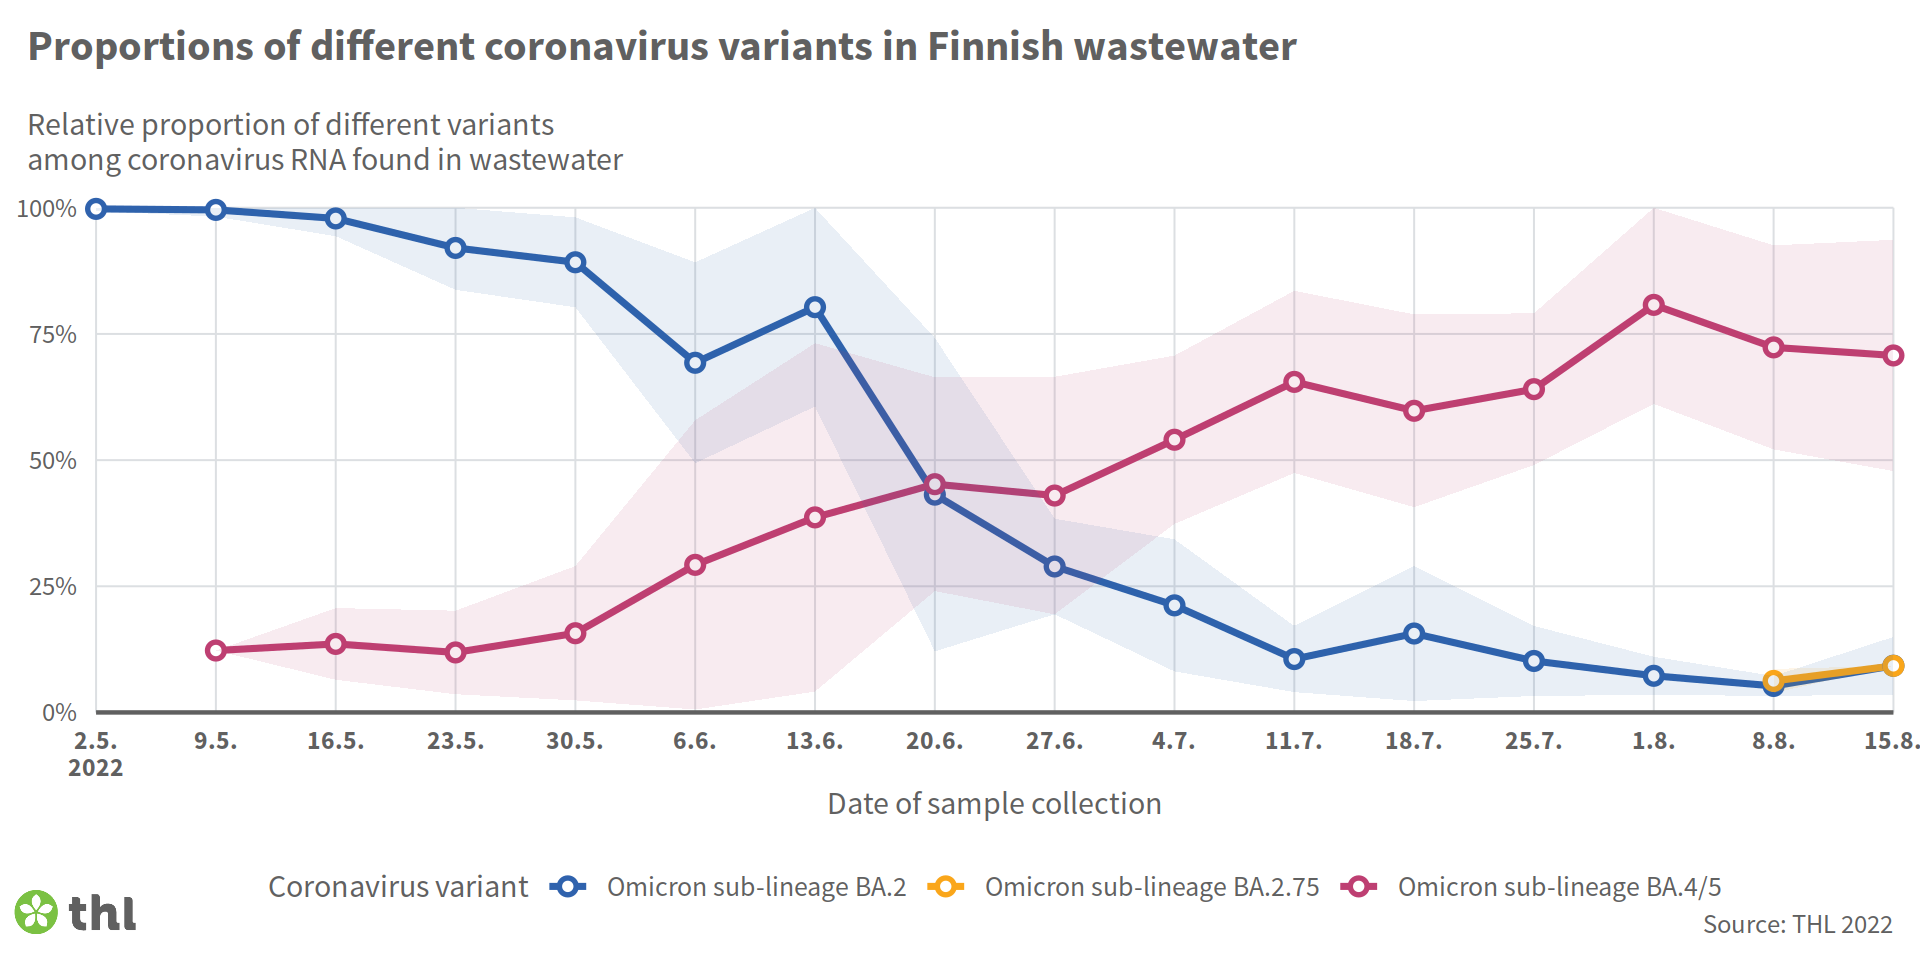 Omicron BA.2 remained the most common subvariant until the end of June, at which time the Omicron BA.4/5 subvariant became the most common coronavirus variant found in Finnish wastewater. Omicron BA.2.75 was detected for the first time in August.